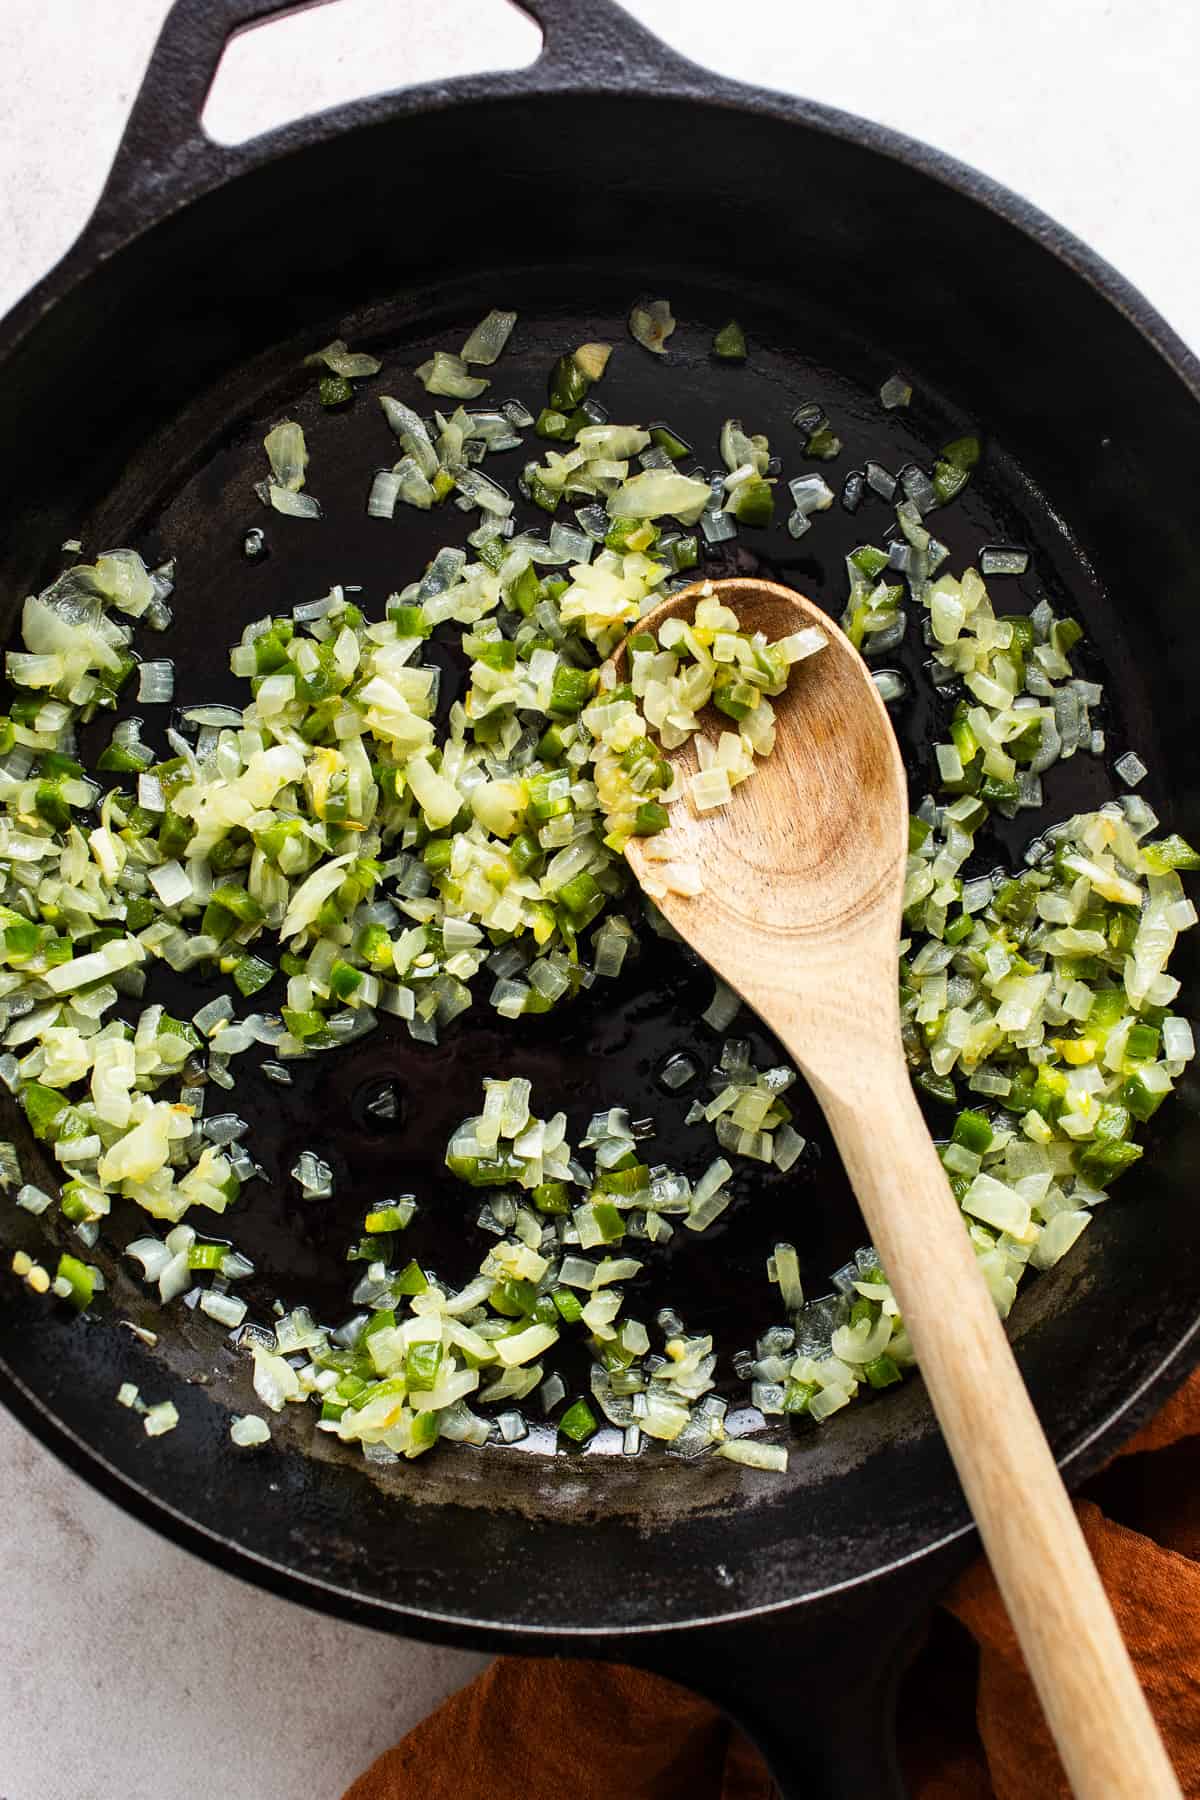 Diced onion and jalapeño being cooked in a skillet with butter.